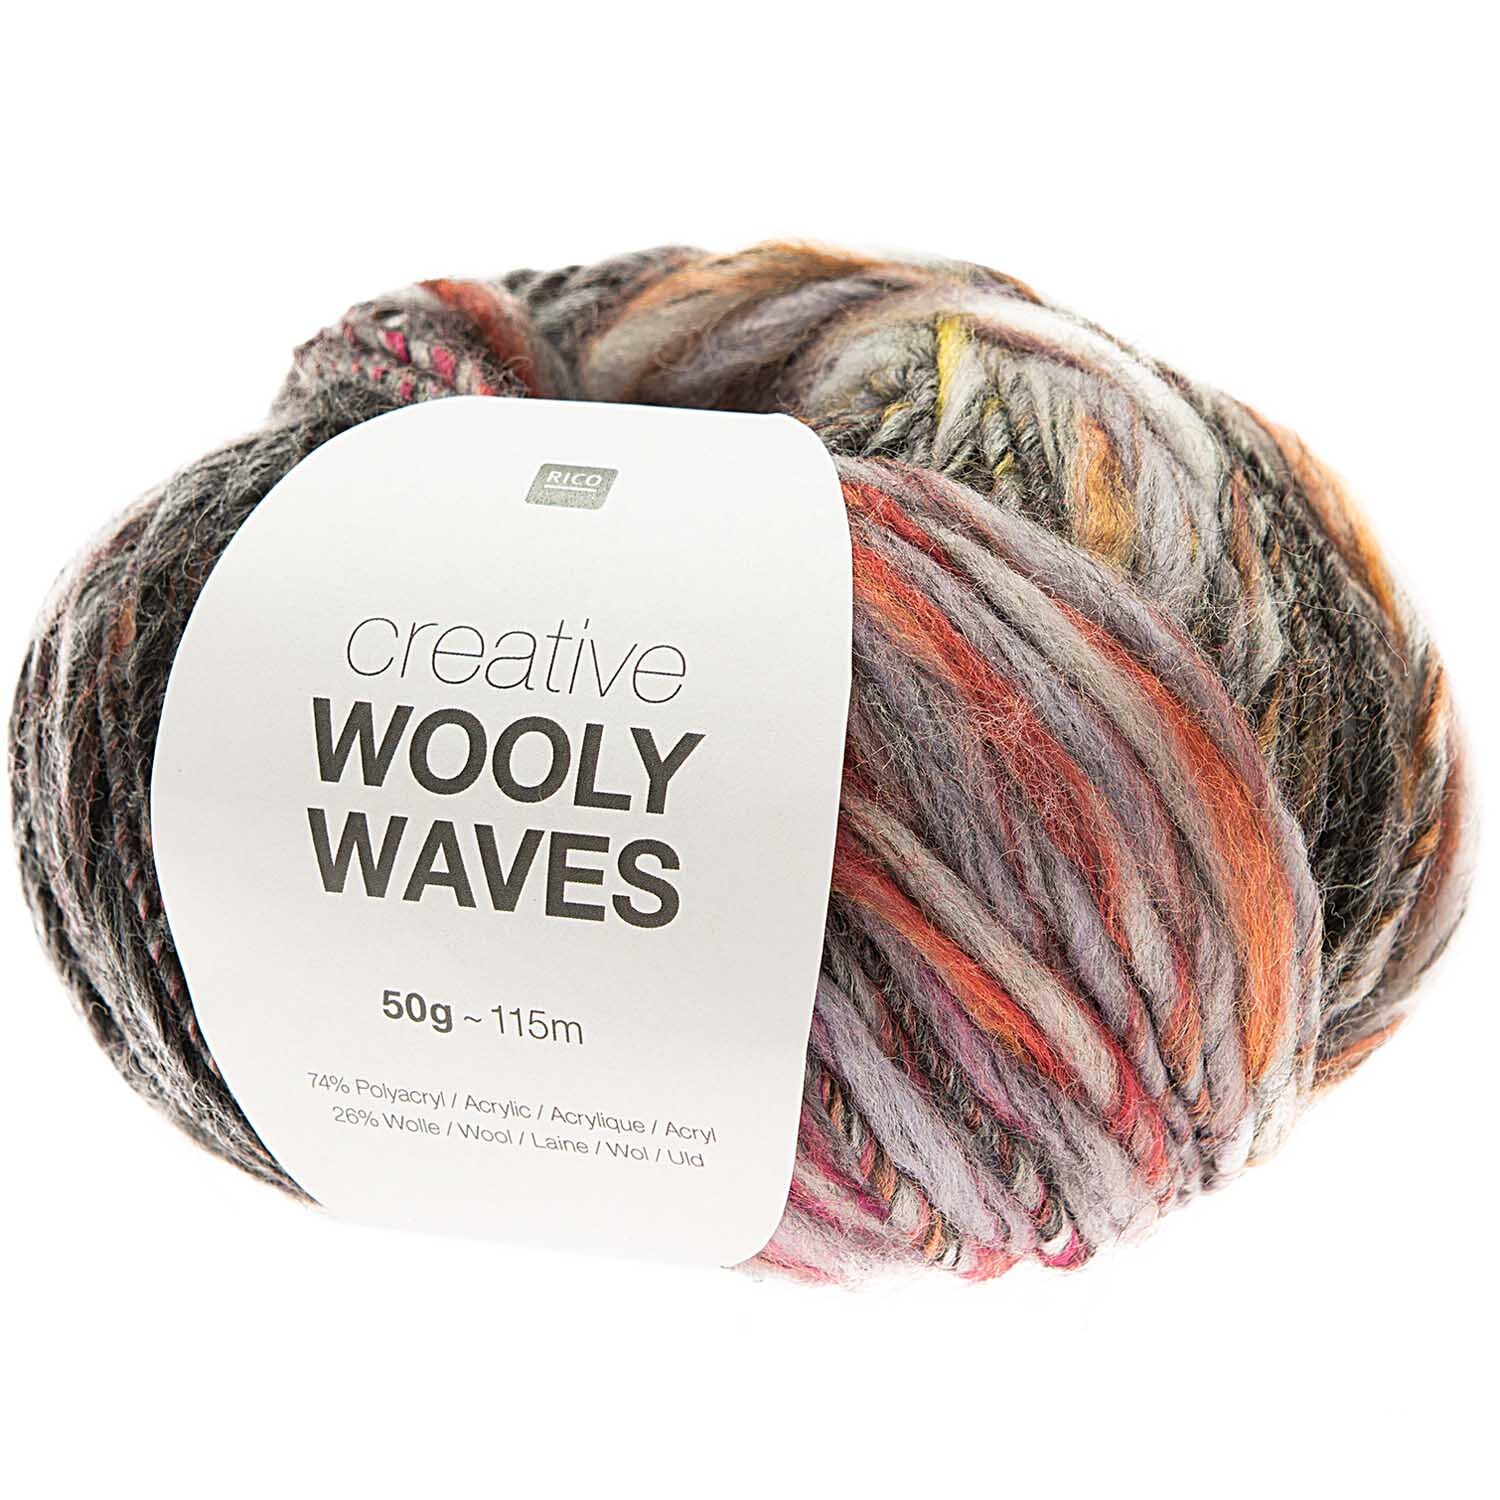 Creative Wooly Waves